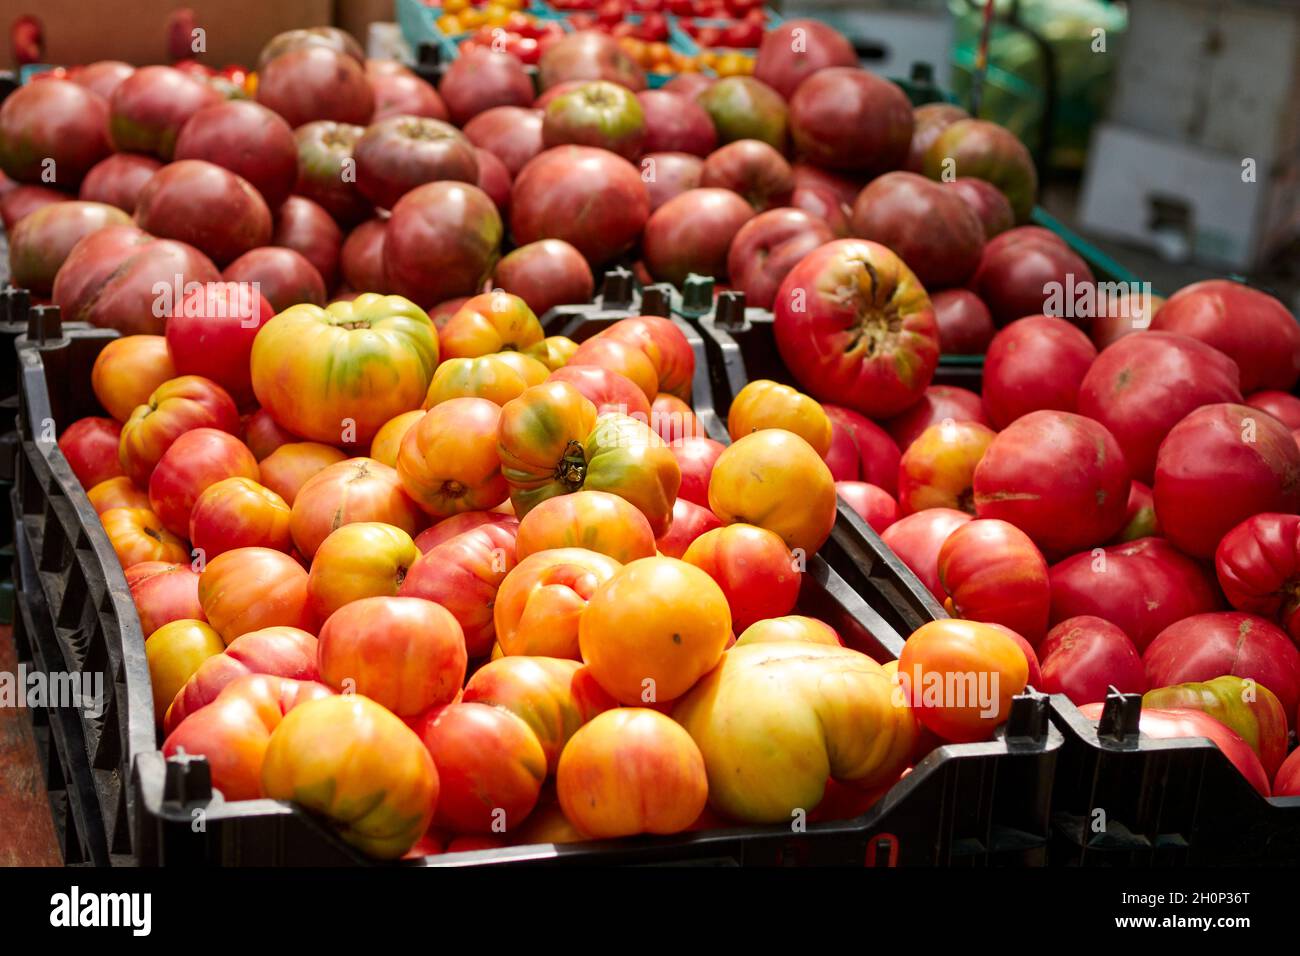 Tomatoes for sale at the Greenmarket in Sunnyside, Queens, New York. Stock Photo